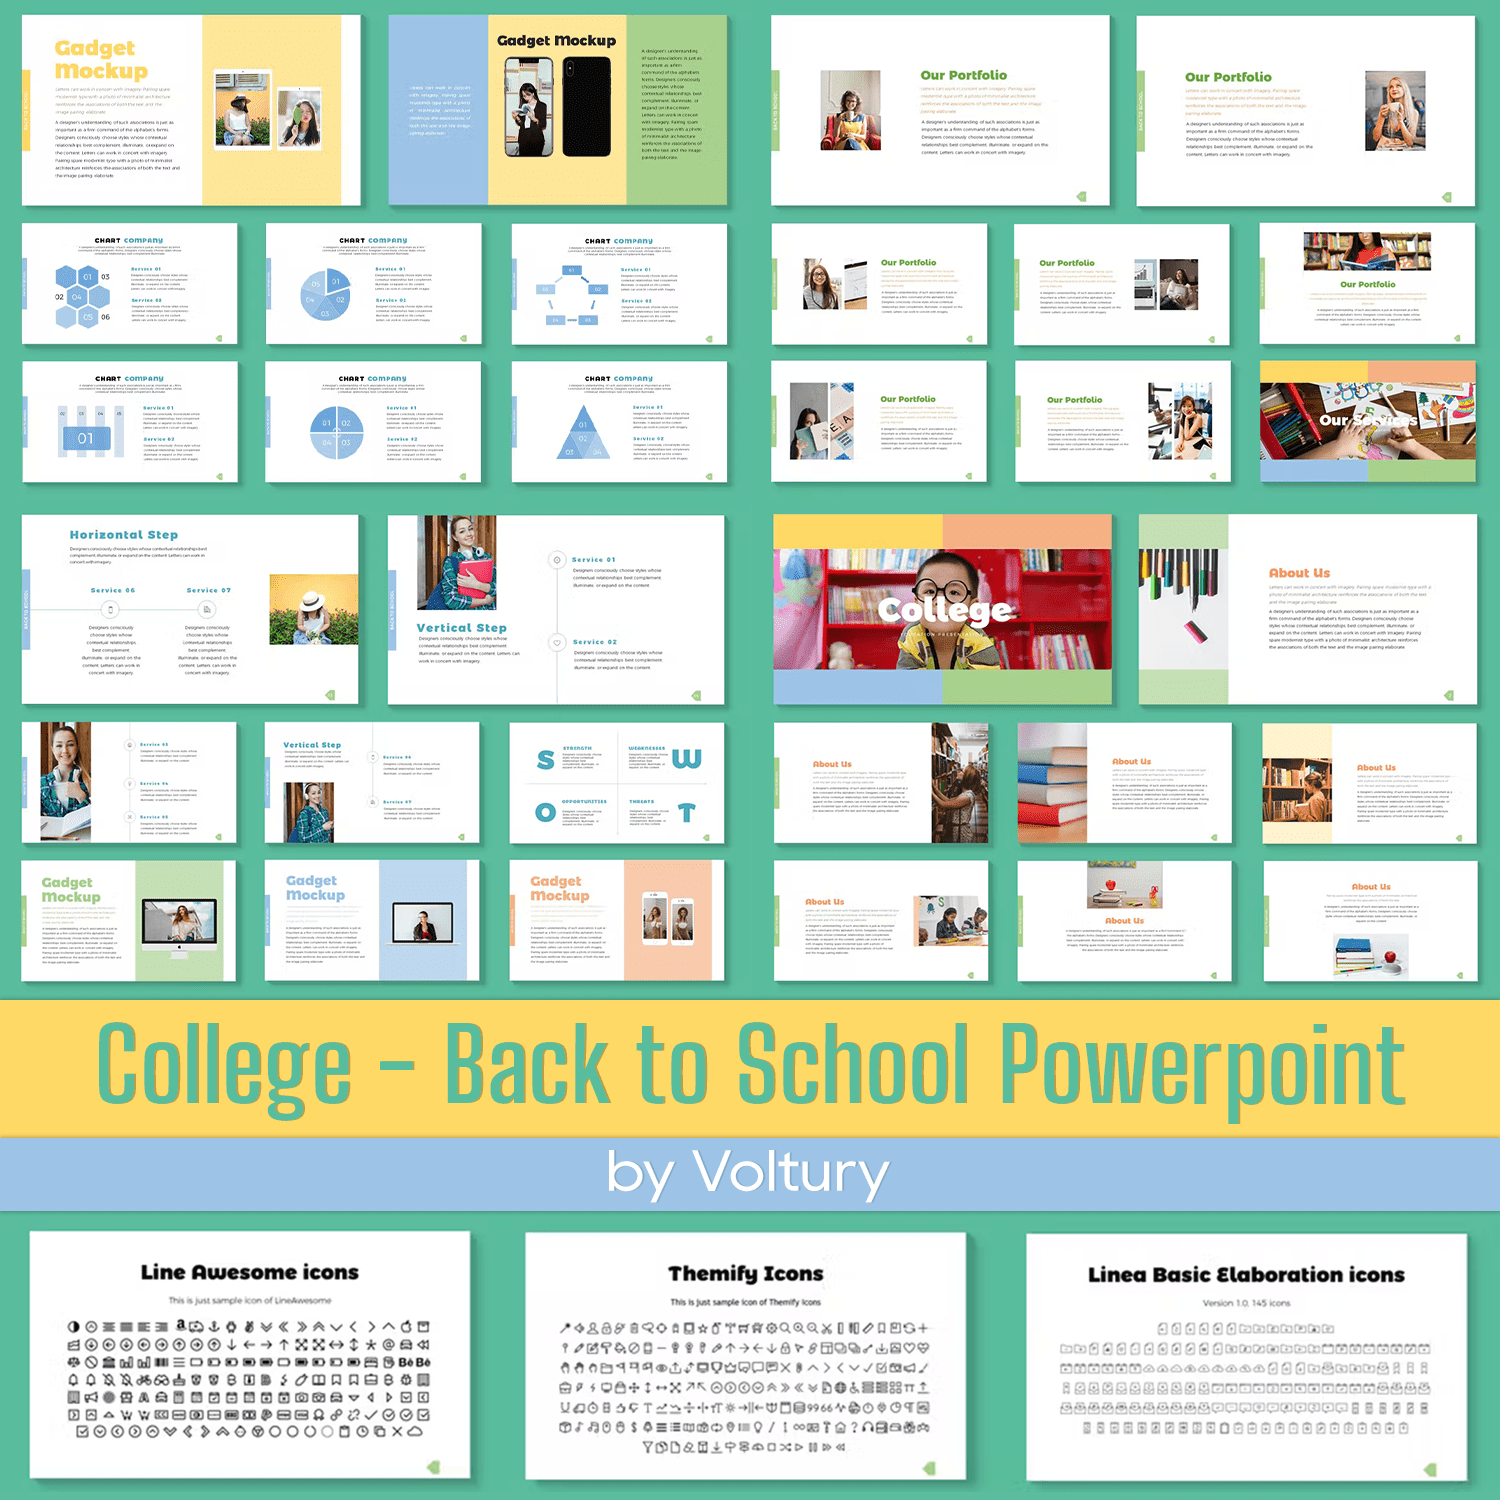 College Back to School Powerpoint created by Voltury.